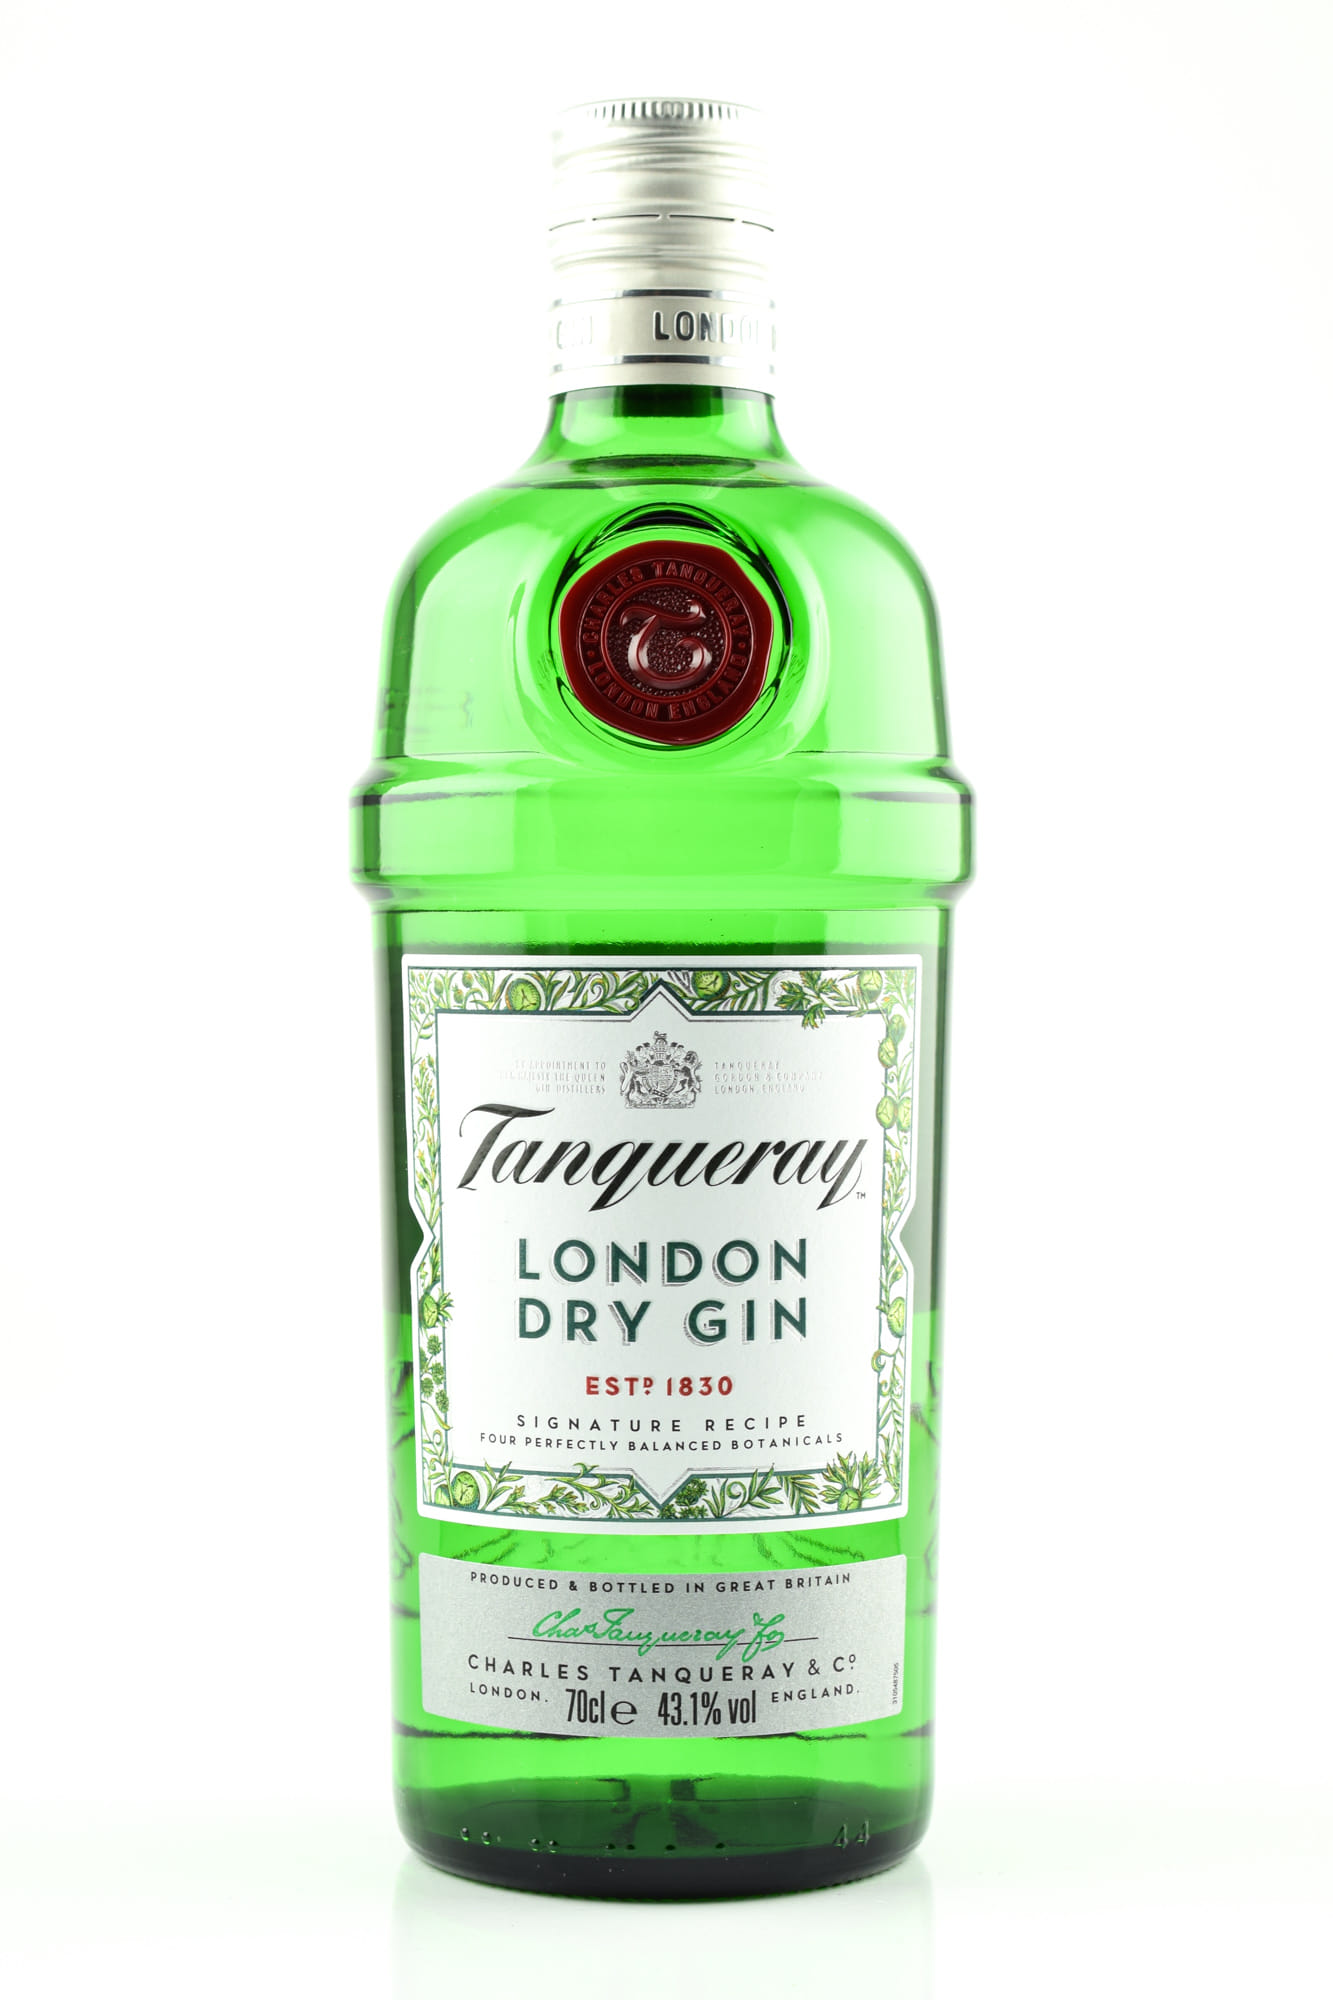 Home | Home at Tanqueray explore Malts >> now! of of Malts